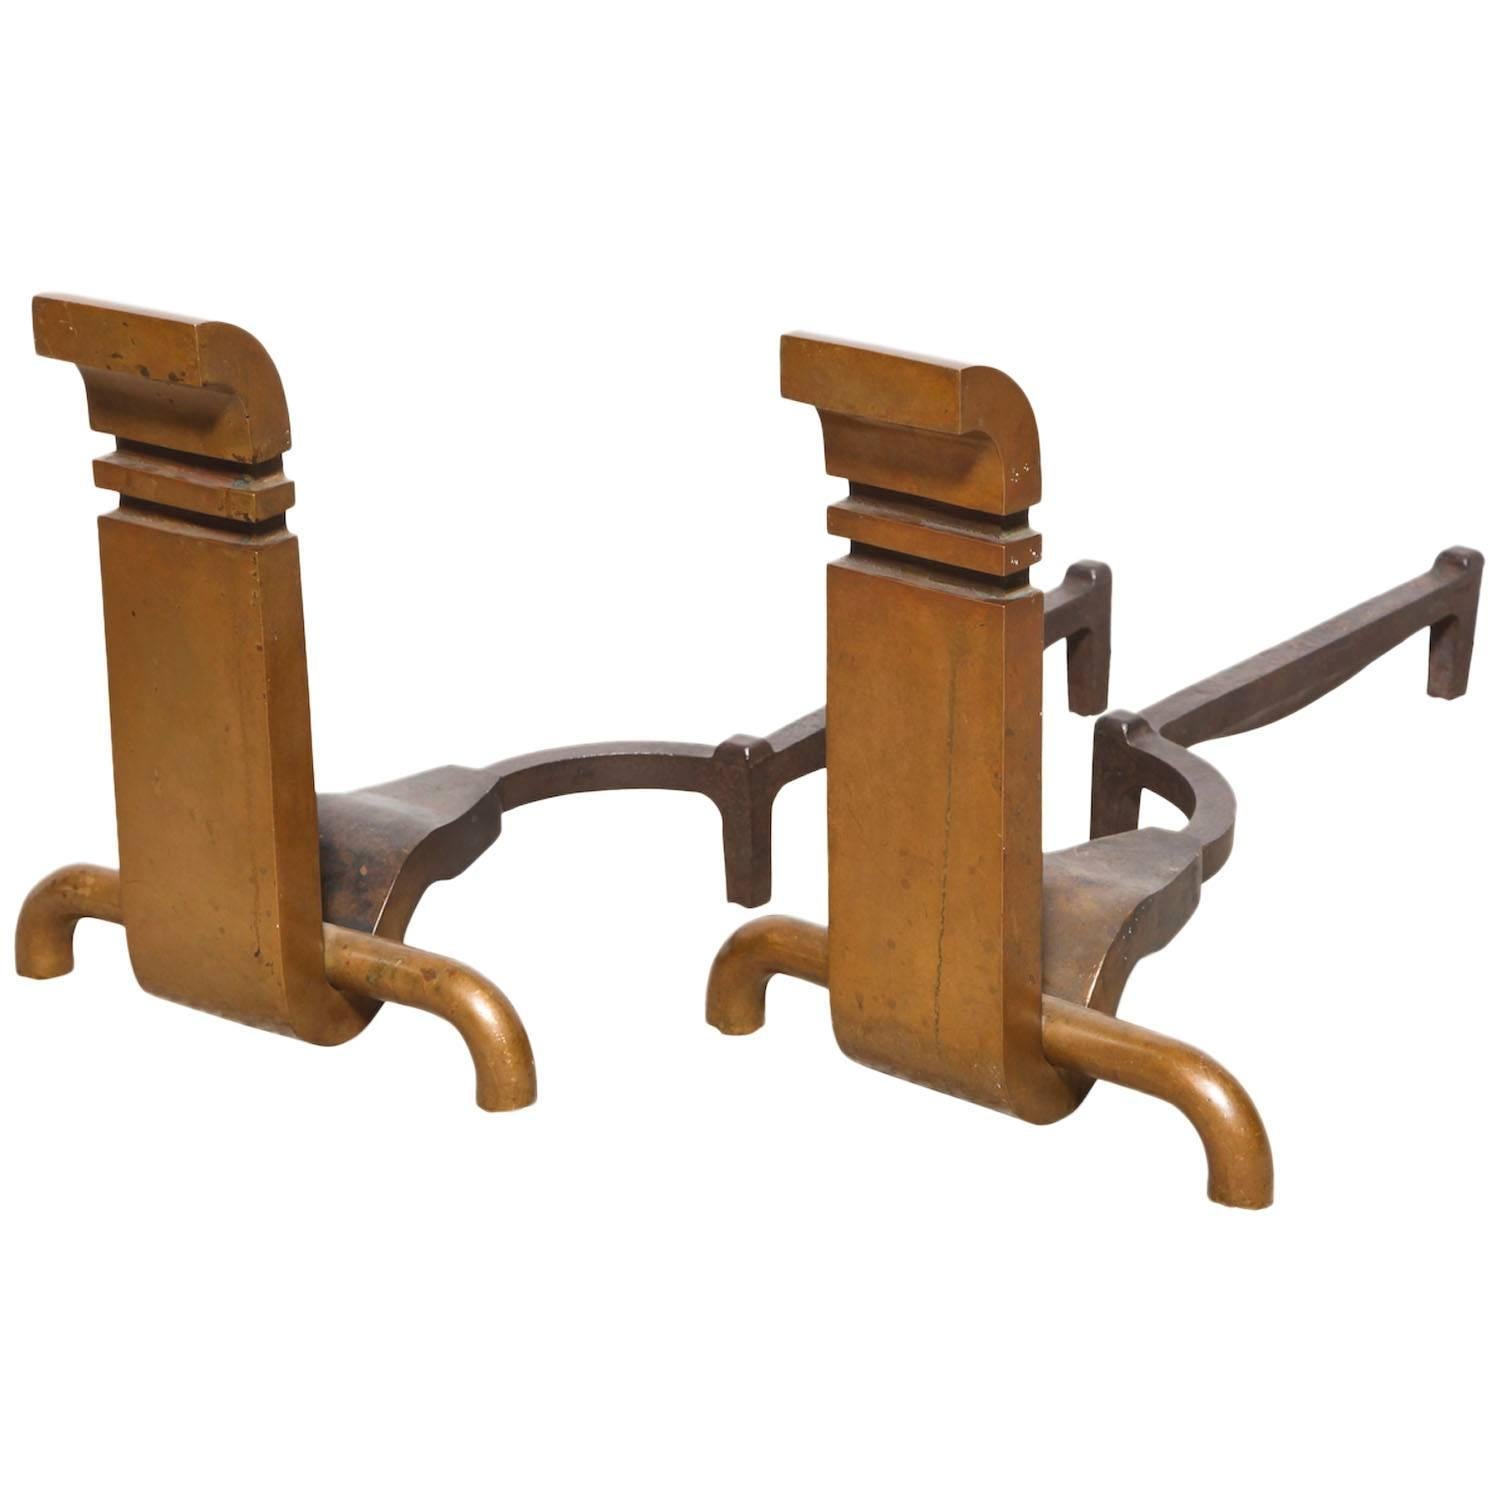 Pair of Bronze Modernist Andirons by Wah Chang